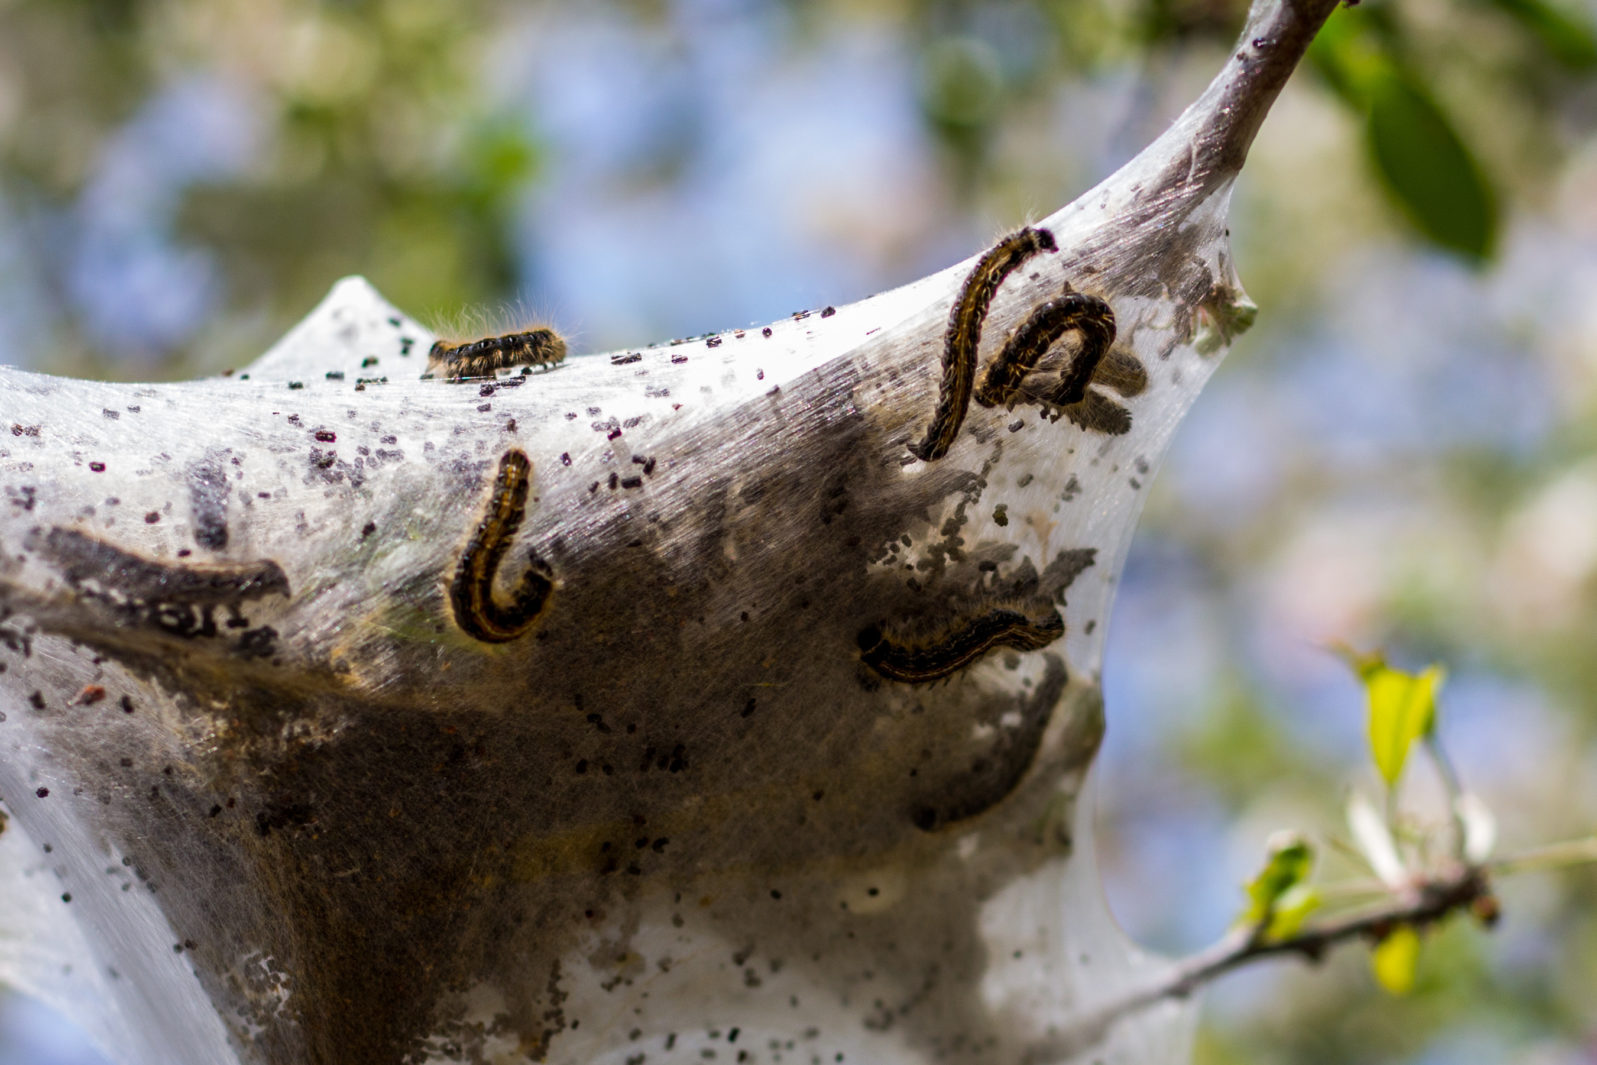 Eastern Tent Caterpillars on a web in a tree in early spring